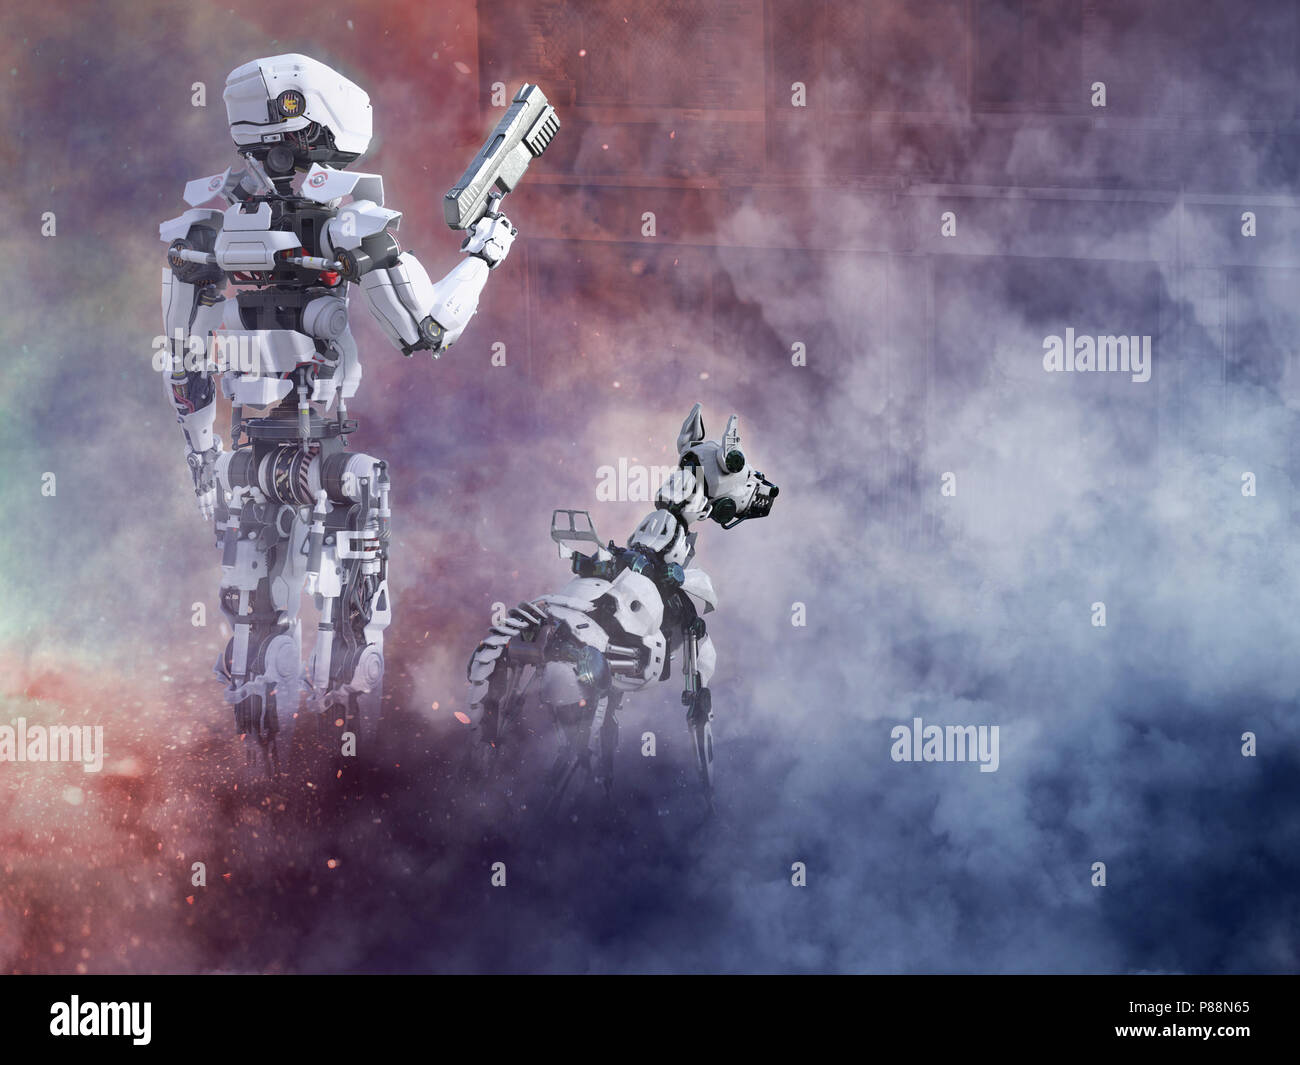 3D rendering of a futuristic robot cop holding gun with a dog beside him, fighting a war in a ruined city. Smoke and fire all around them. Stock Photo